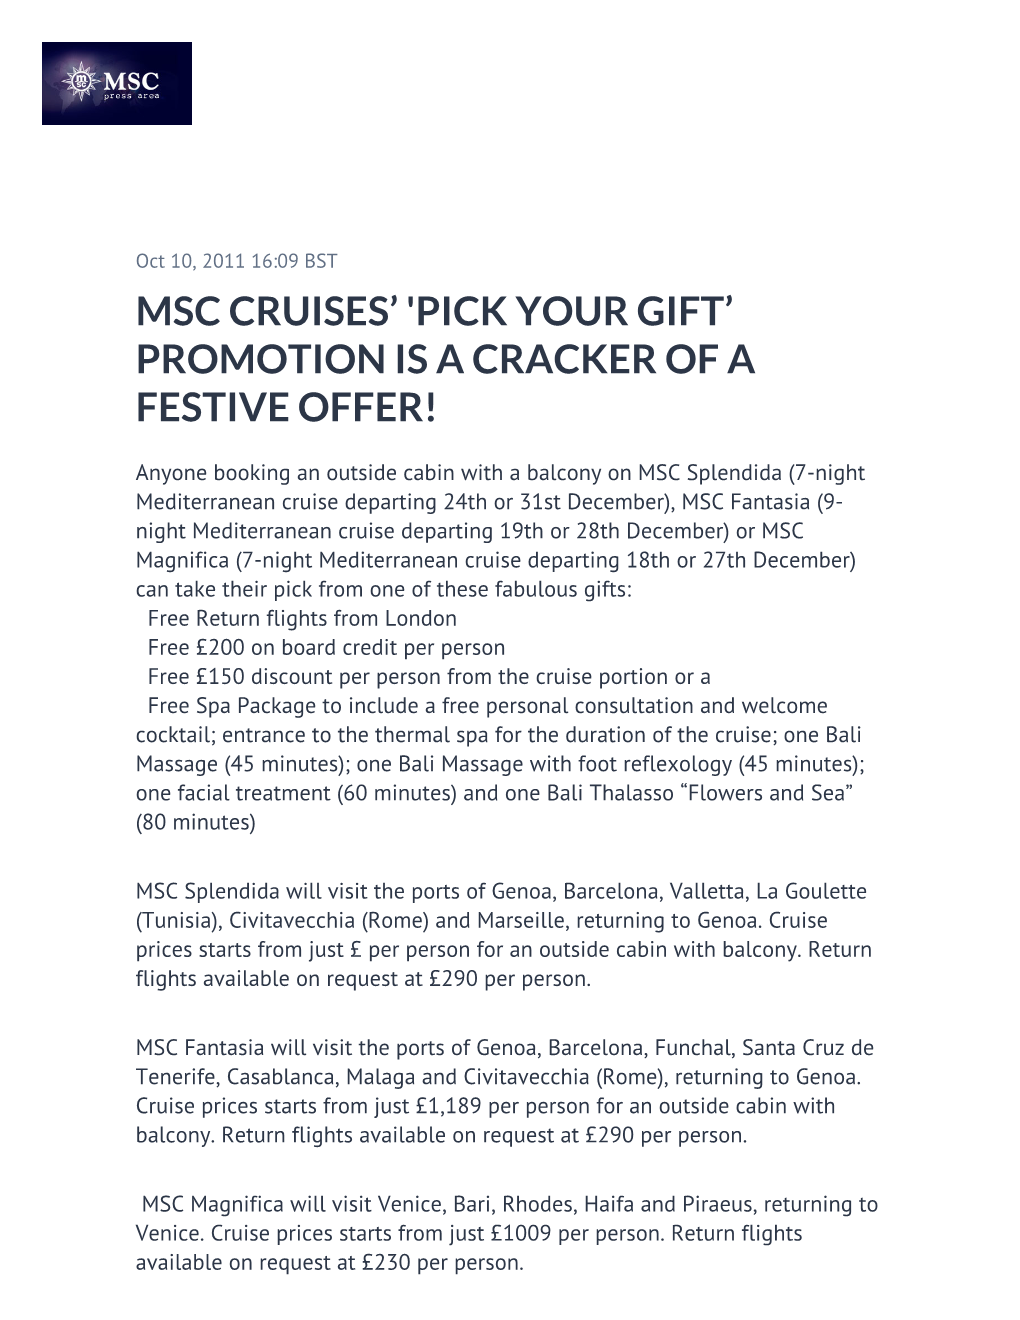 Msc Cruises’ 'Pick Your Gift’ Promotion Is a Cracker of a Festive Offer!